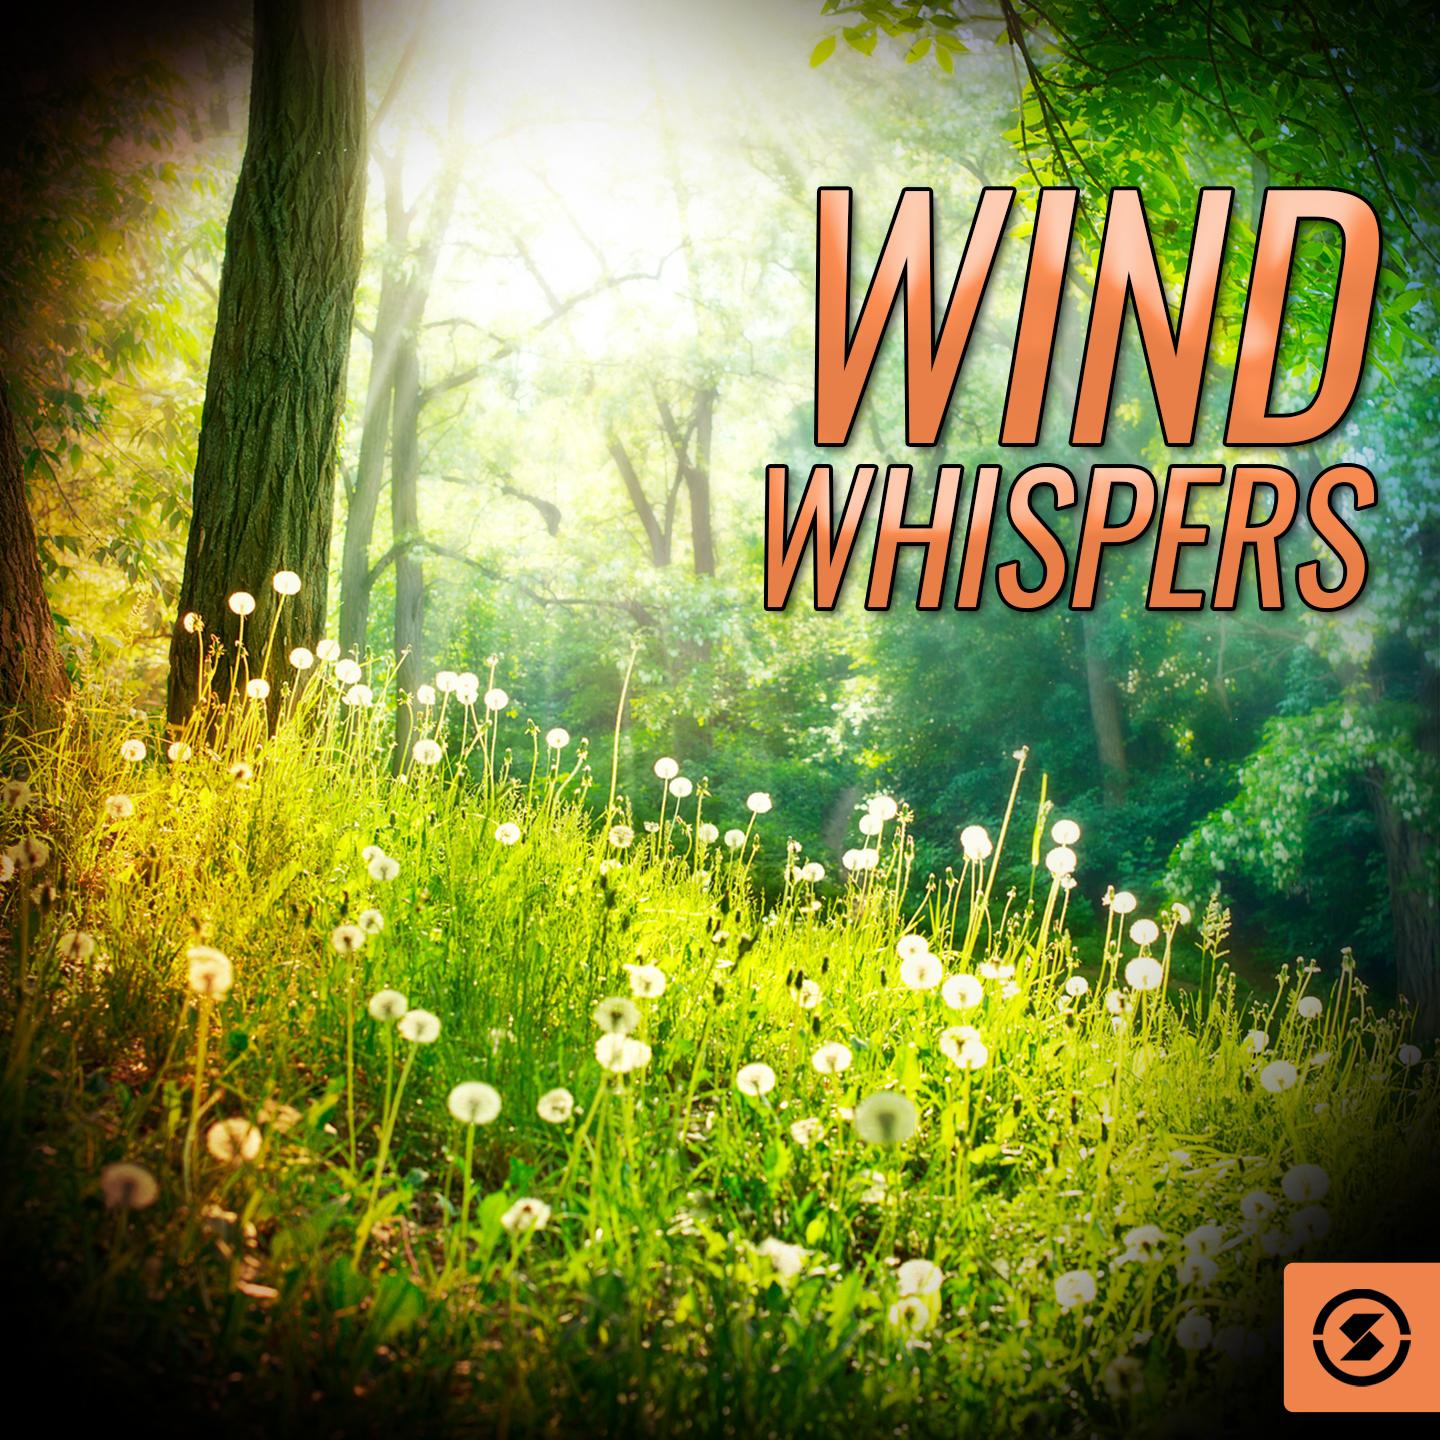 Wind Whispers